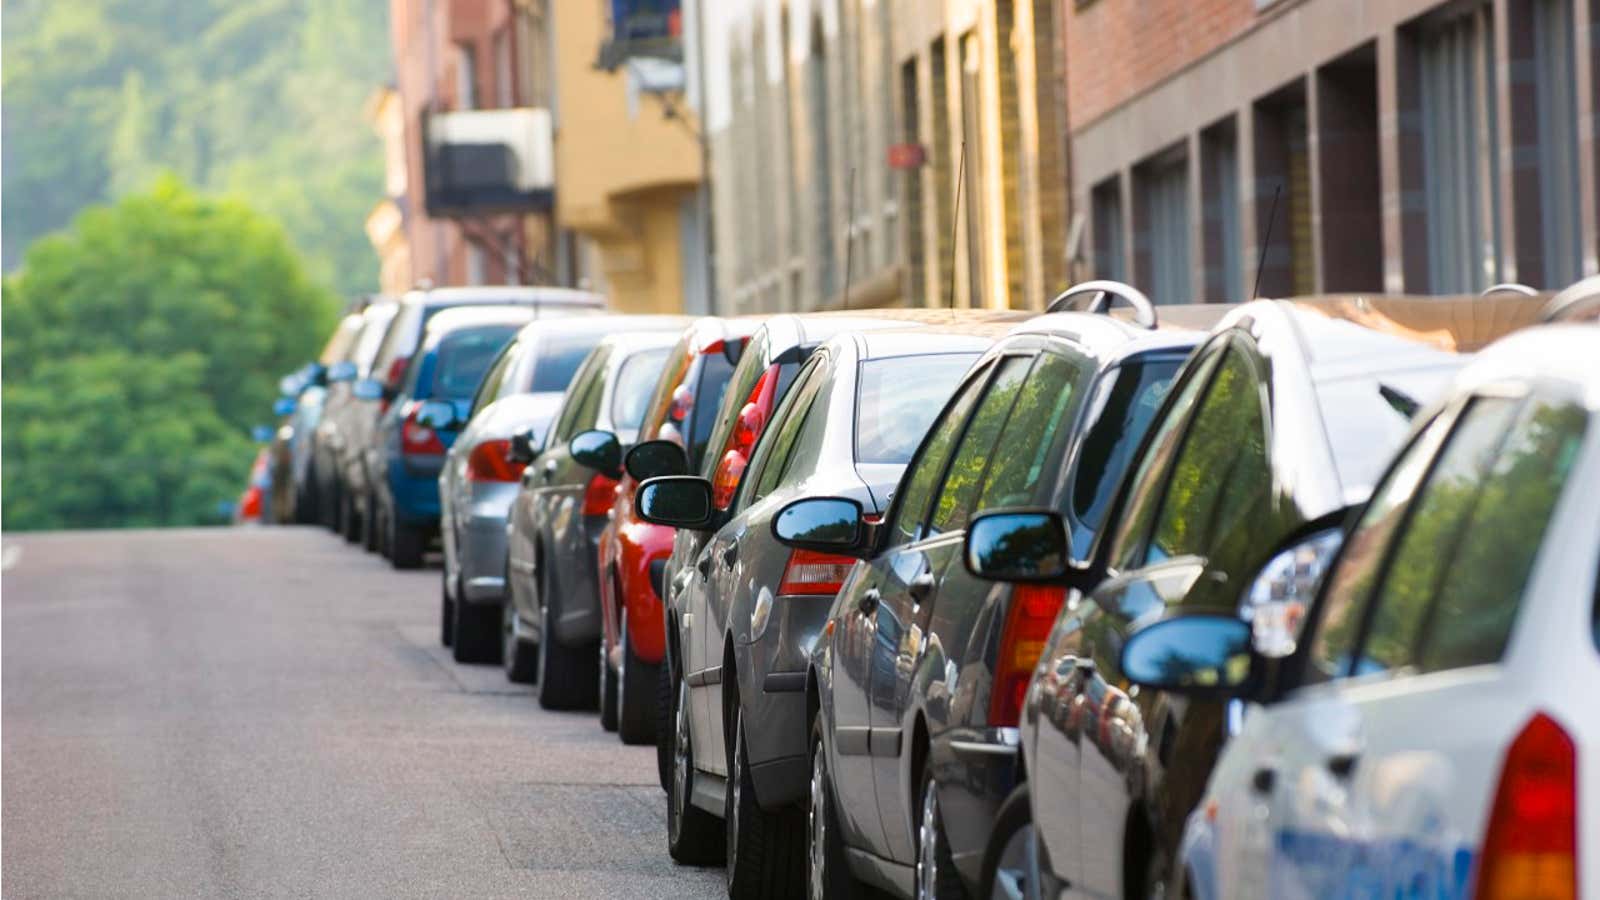 30% of cars in downtown LA traffic are looking for parking